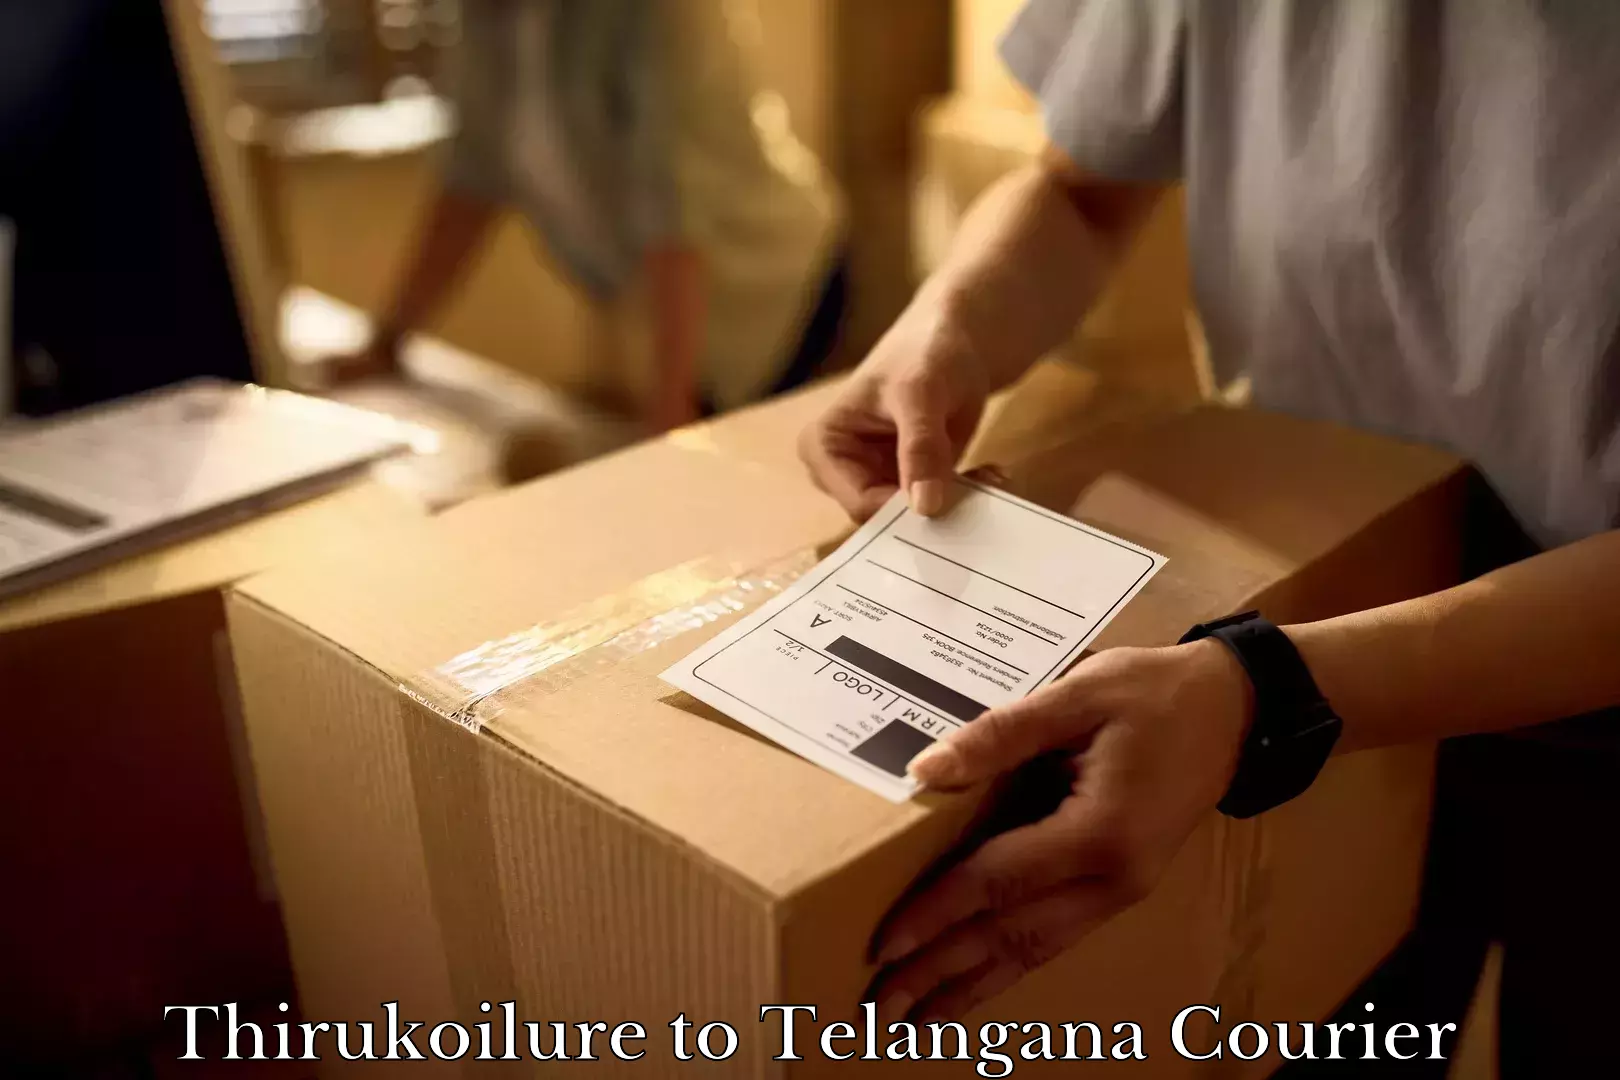 Efficient packing and moving Thirukoilure to Atmakur Wanaparthy